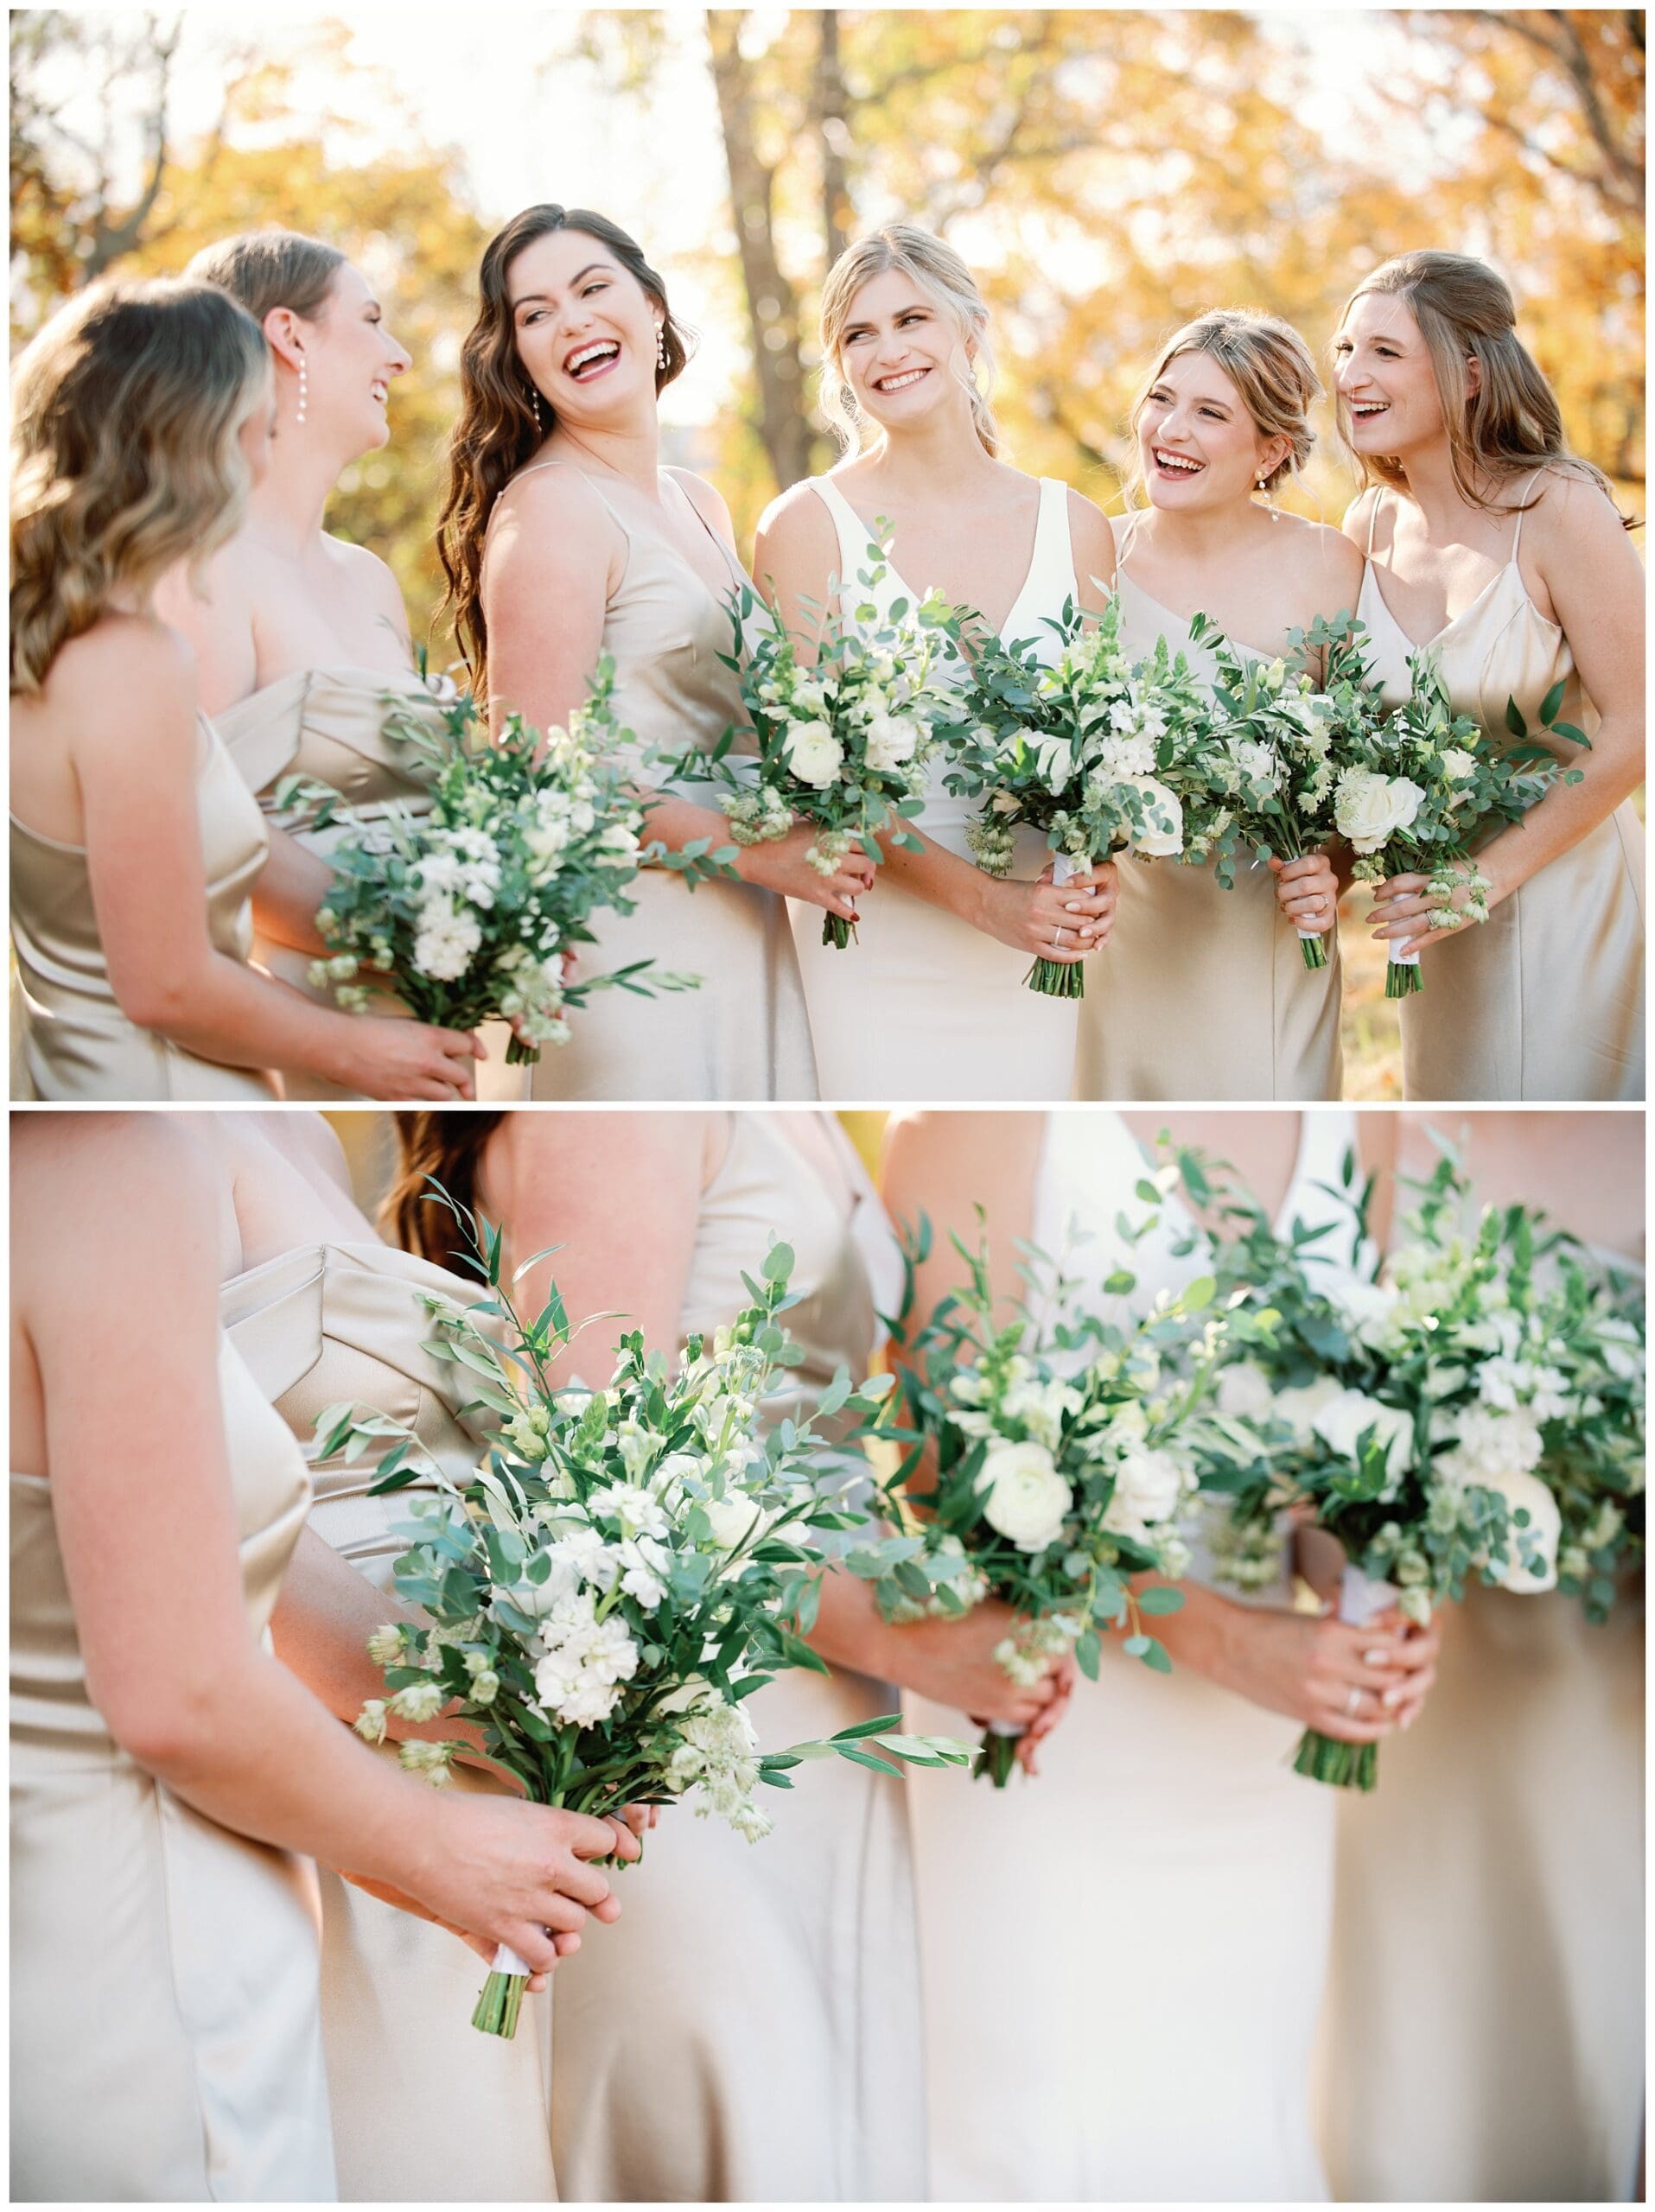 A group of bridesmaids in gold dresses with green bouquets at a fall wedding at Crest Center.